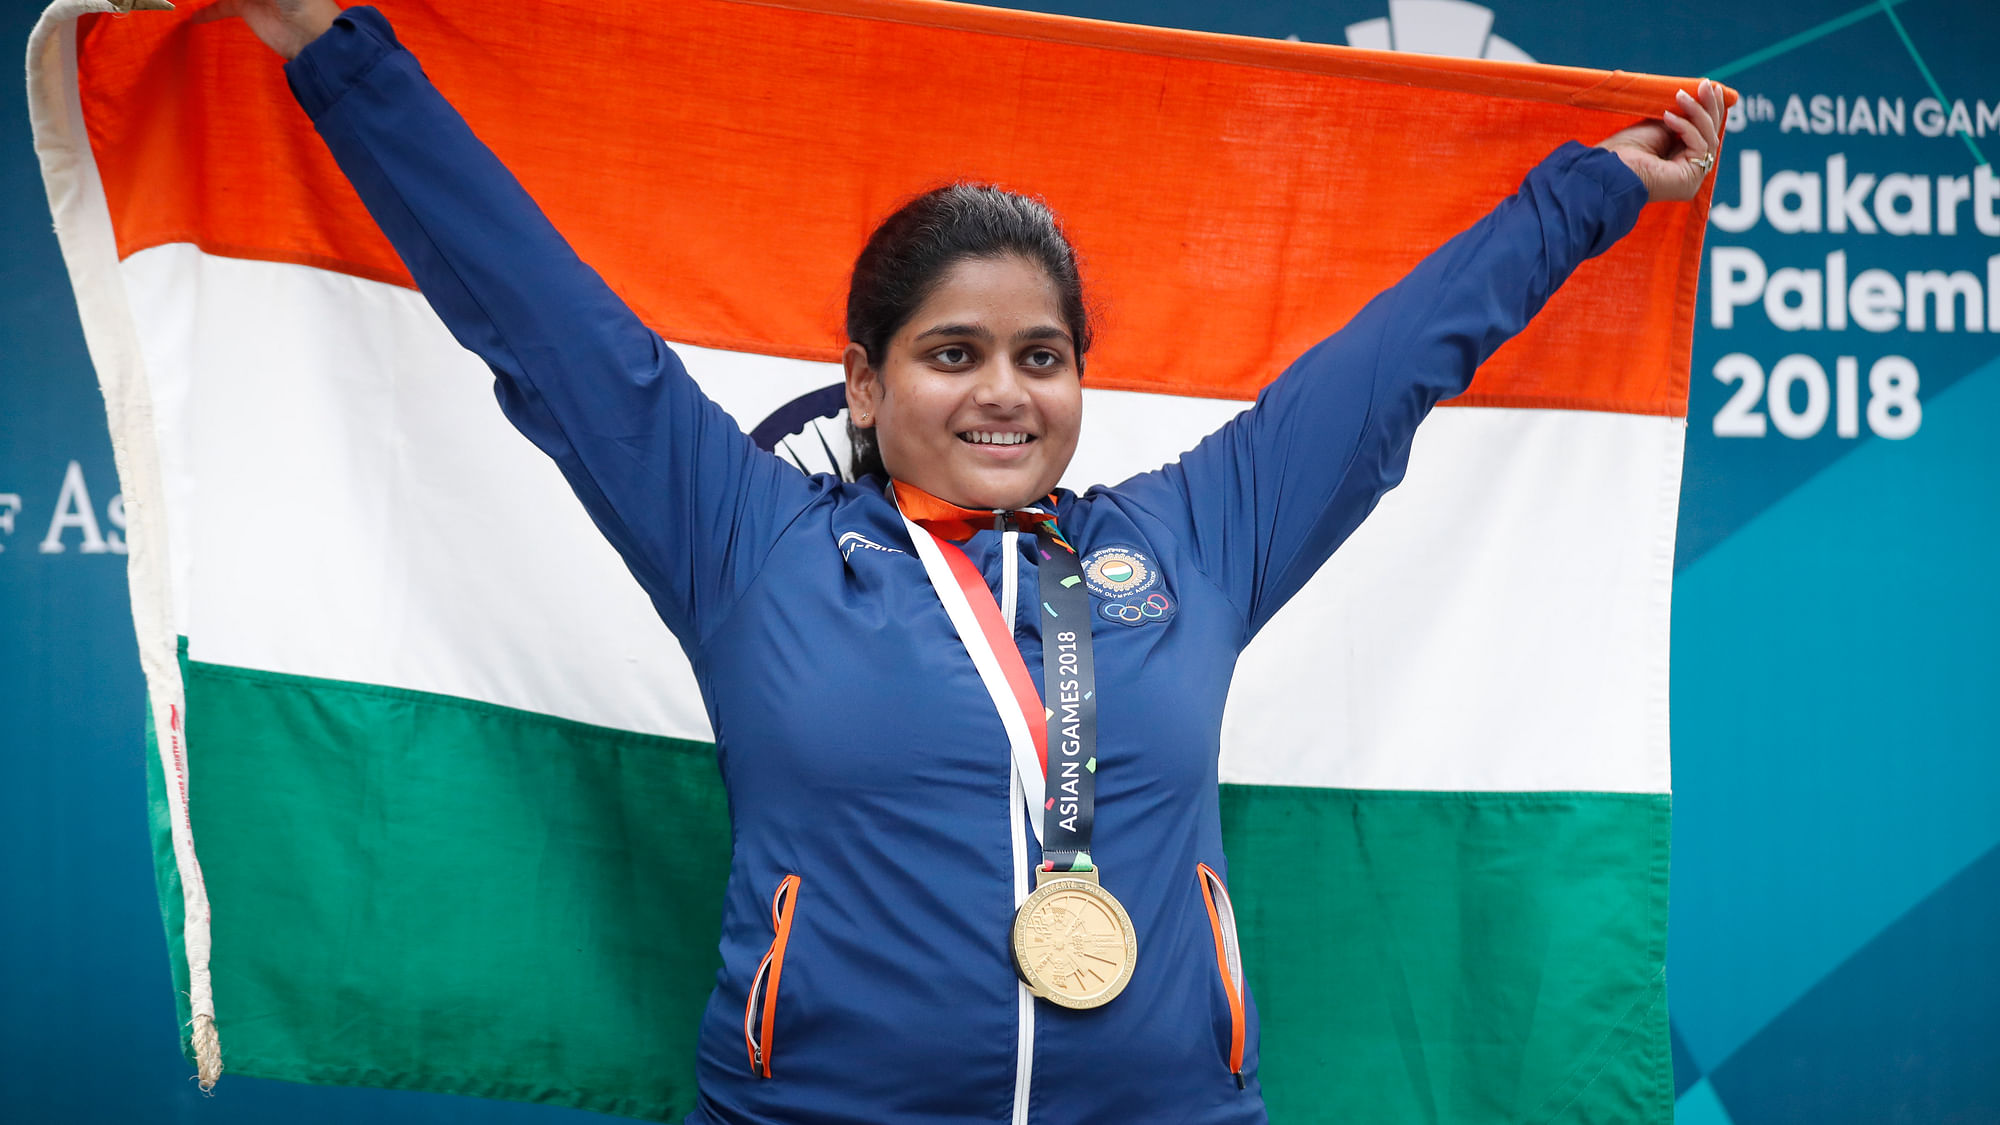 India’s Rahi Jeevan Sarnobat during the awards ceremonies for the 25m pistol women’s shooting event at the 18th Asian Games in Palembang, Indonesia.